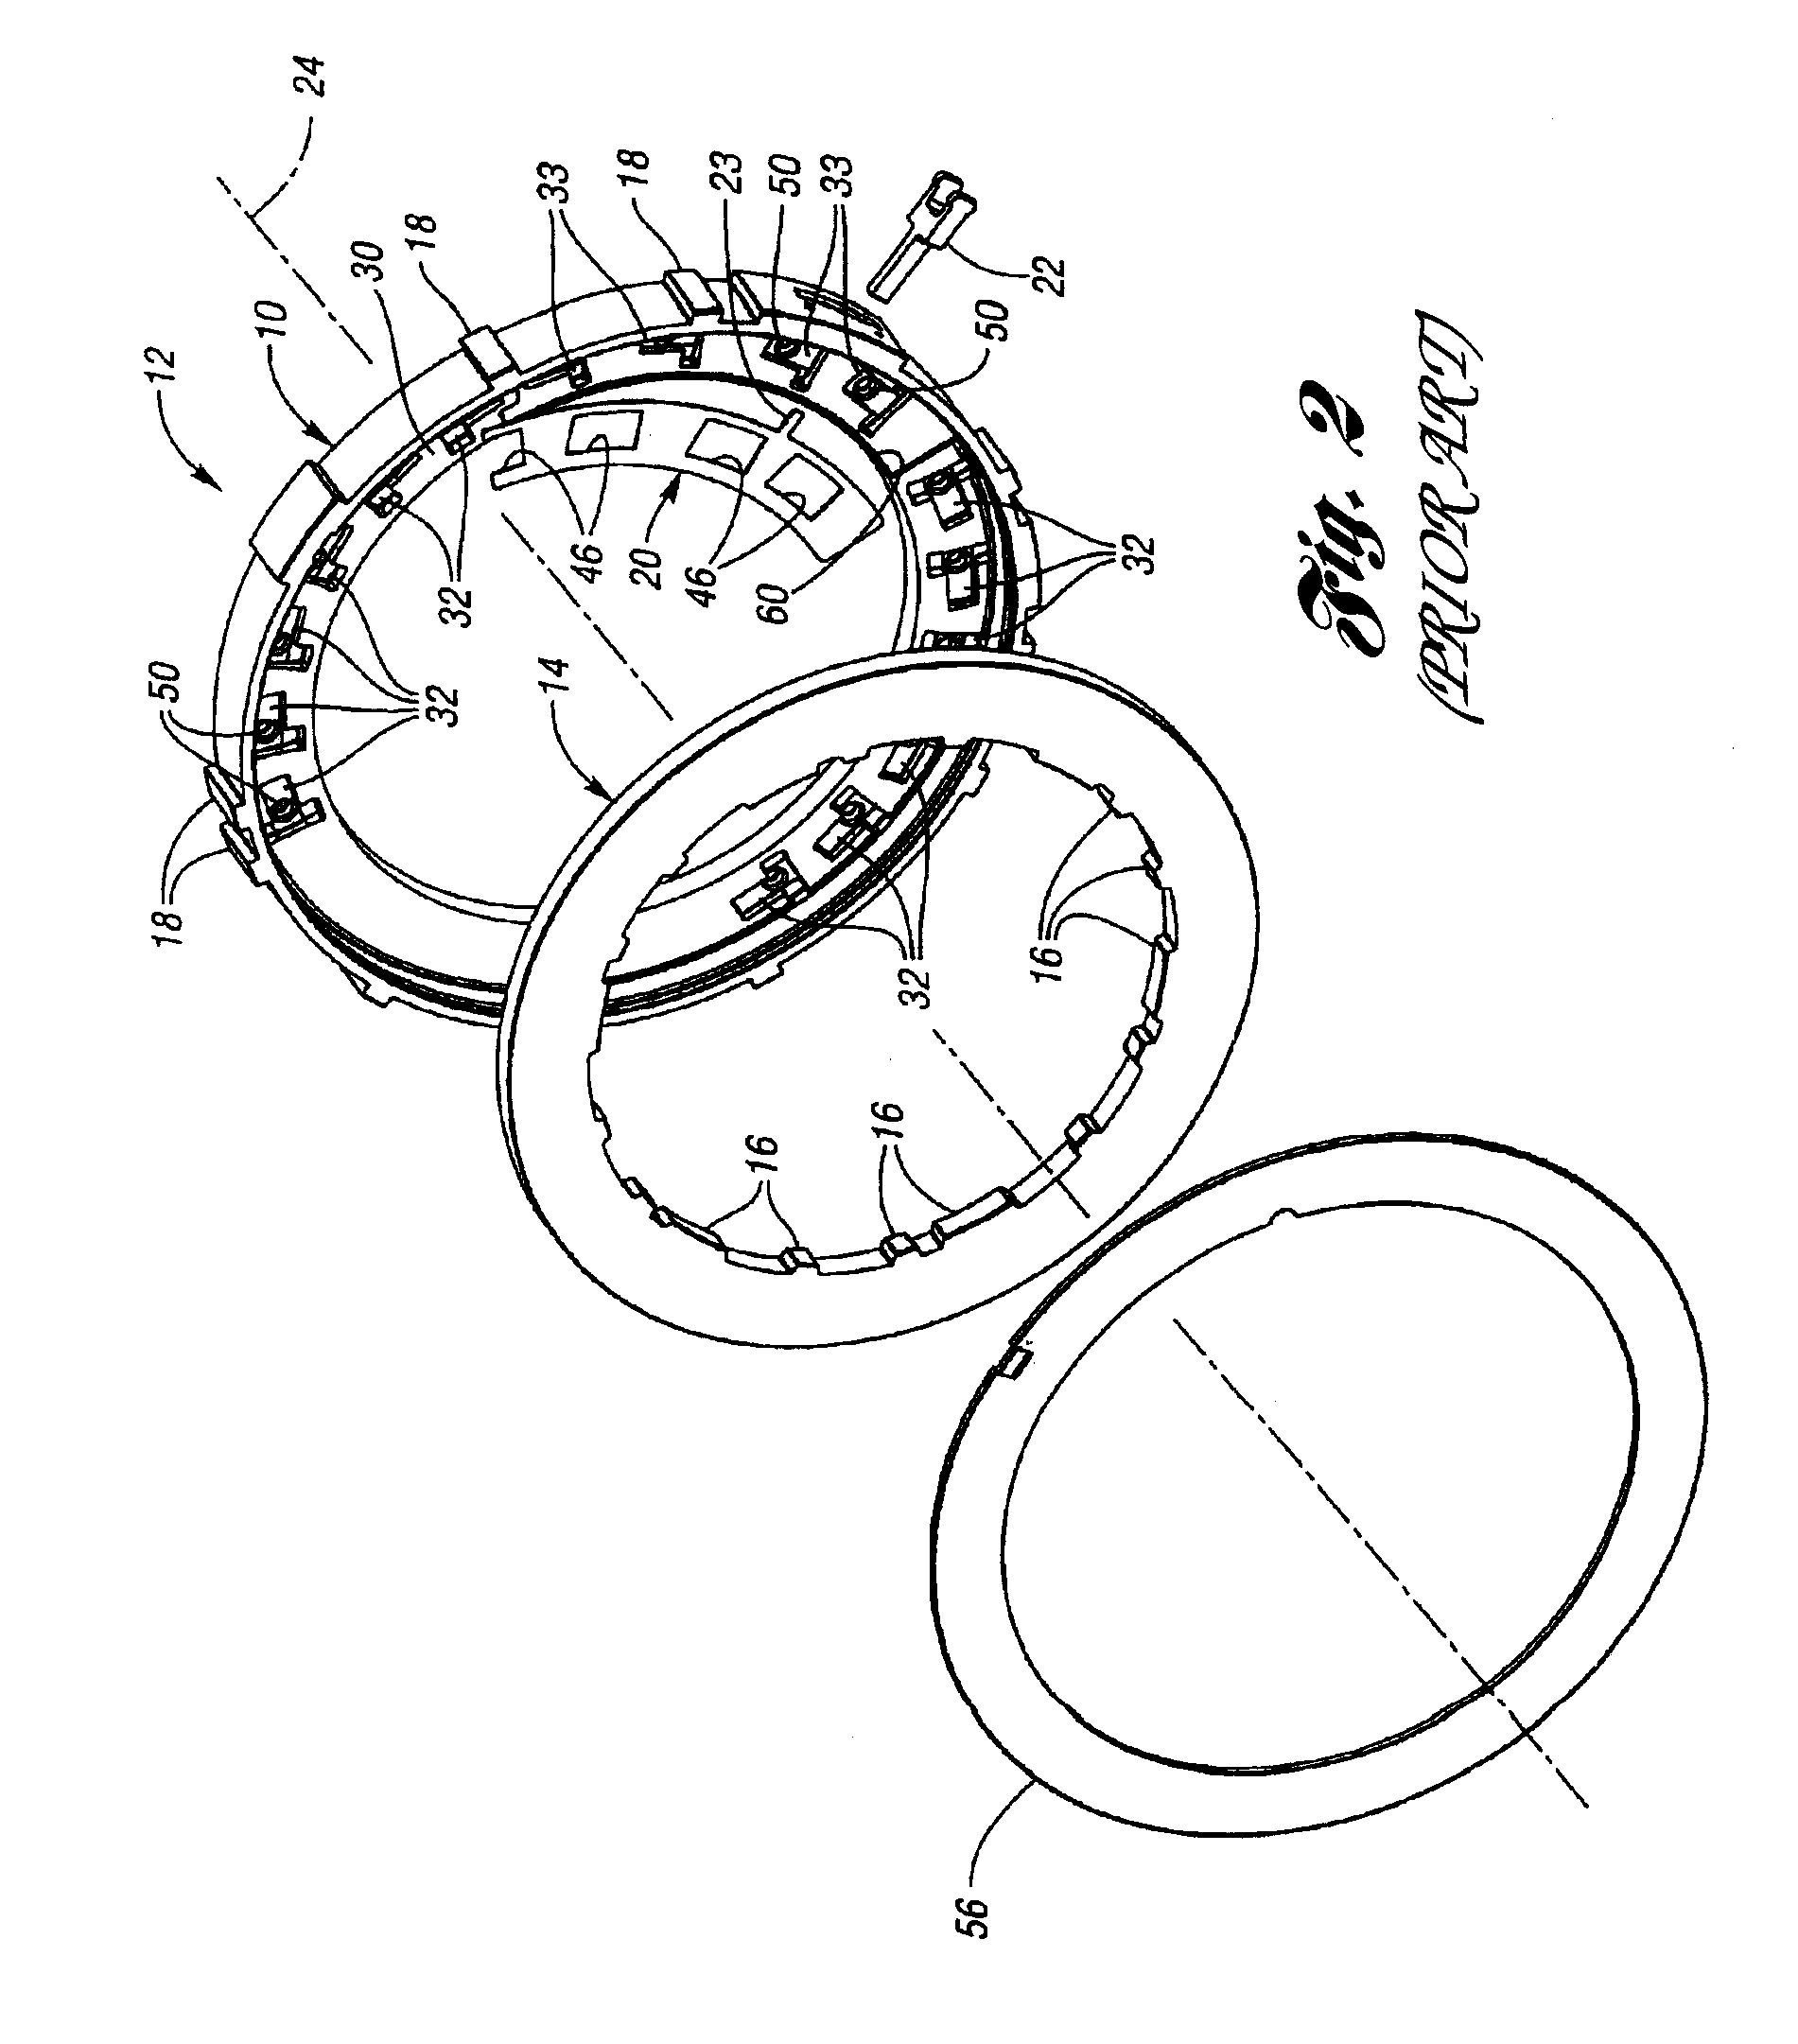 Overrunning coupling and control assembly including apparatus having a latching mechanism